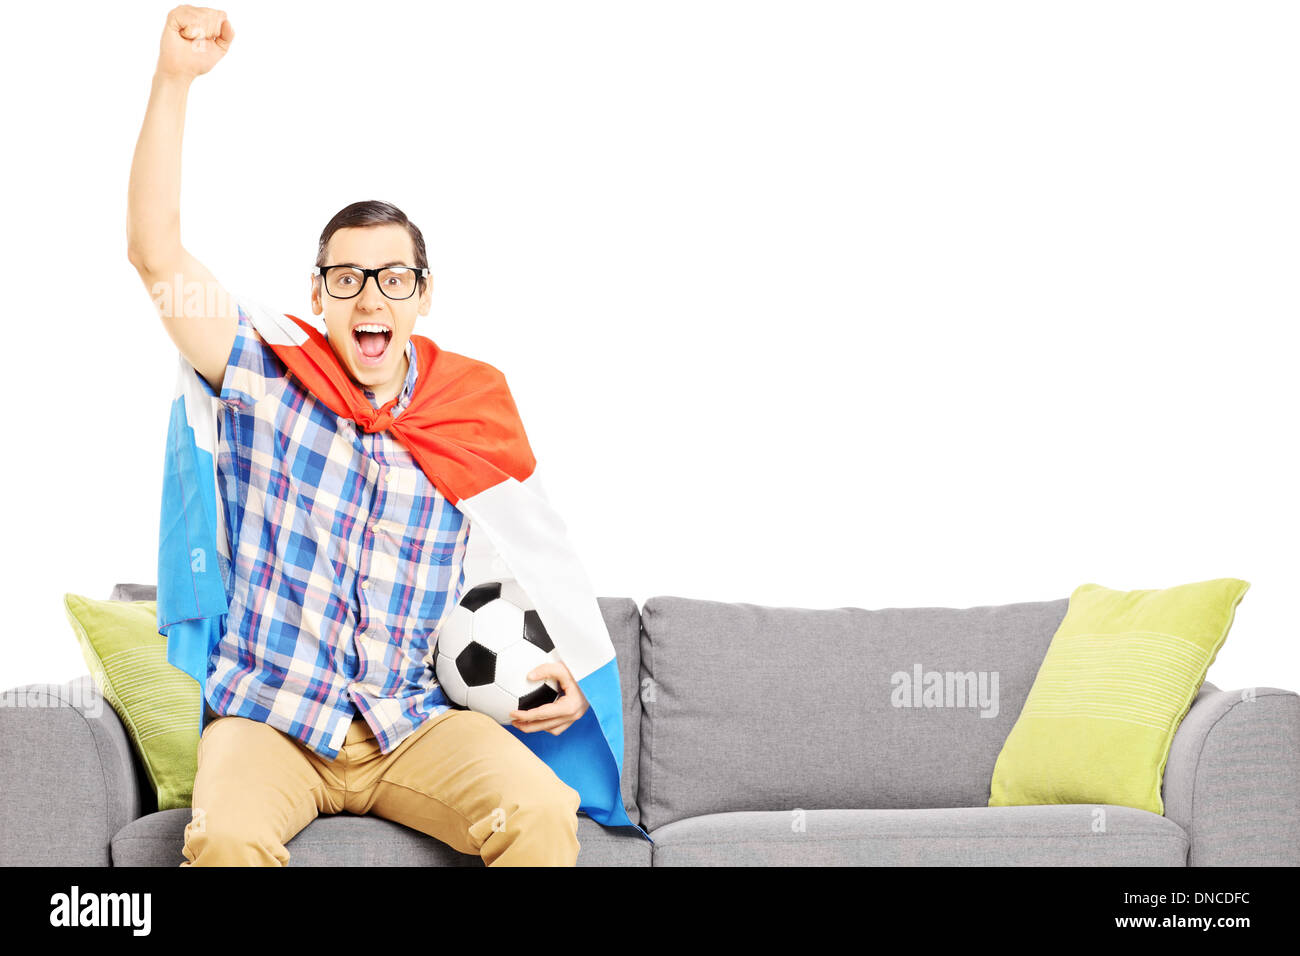 Cheerful male sport fan with soccer ball and flag watching sport Stock Photo